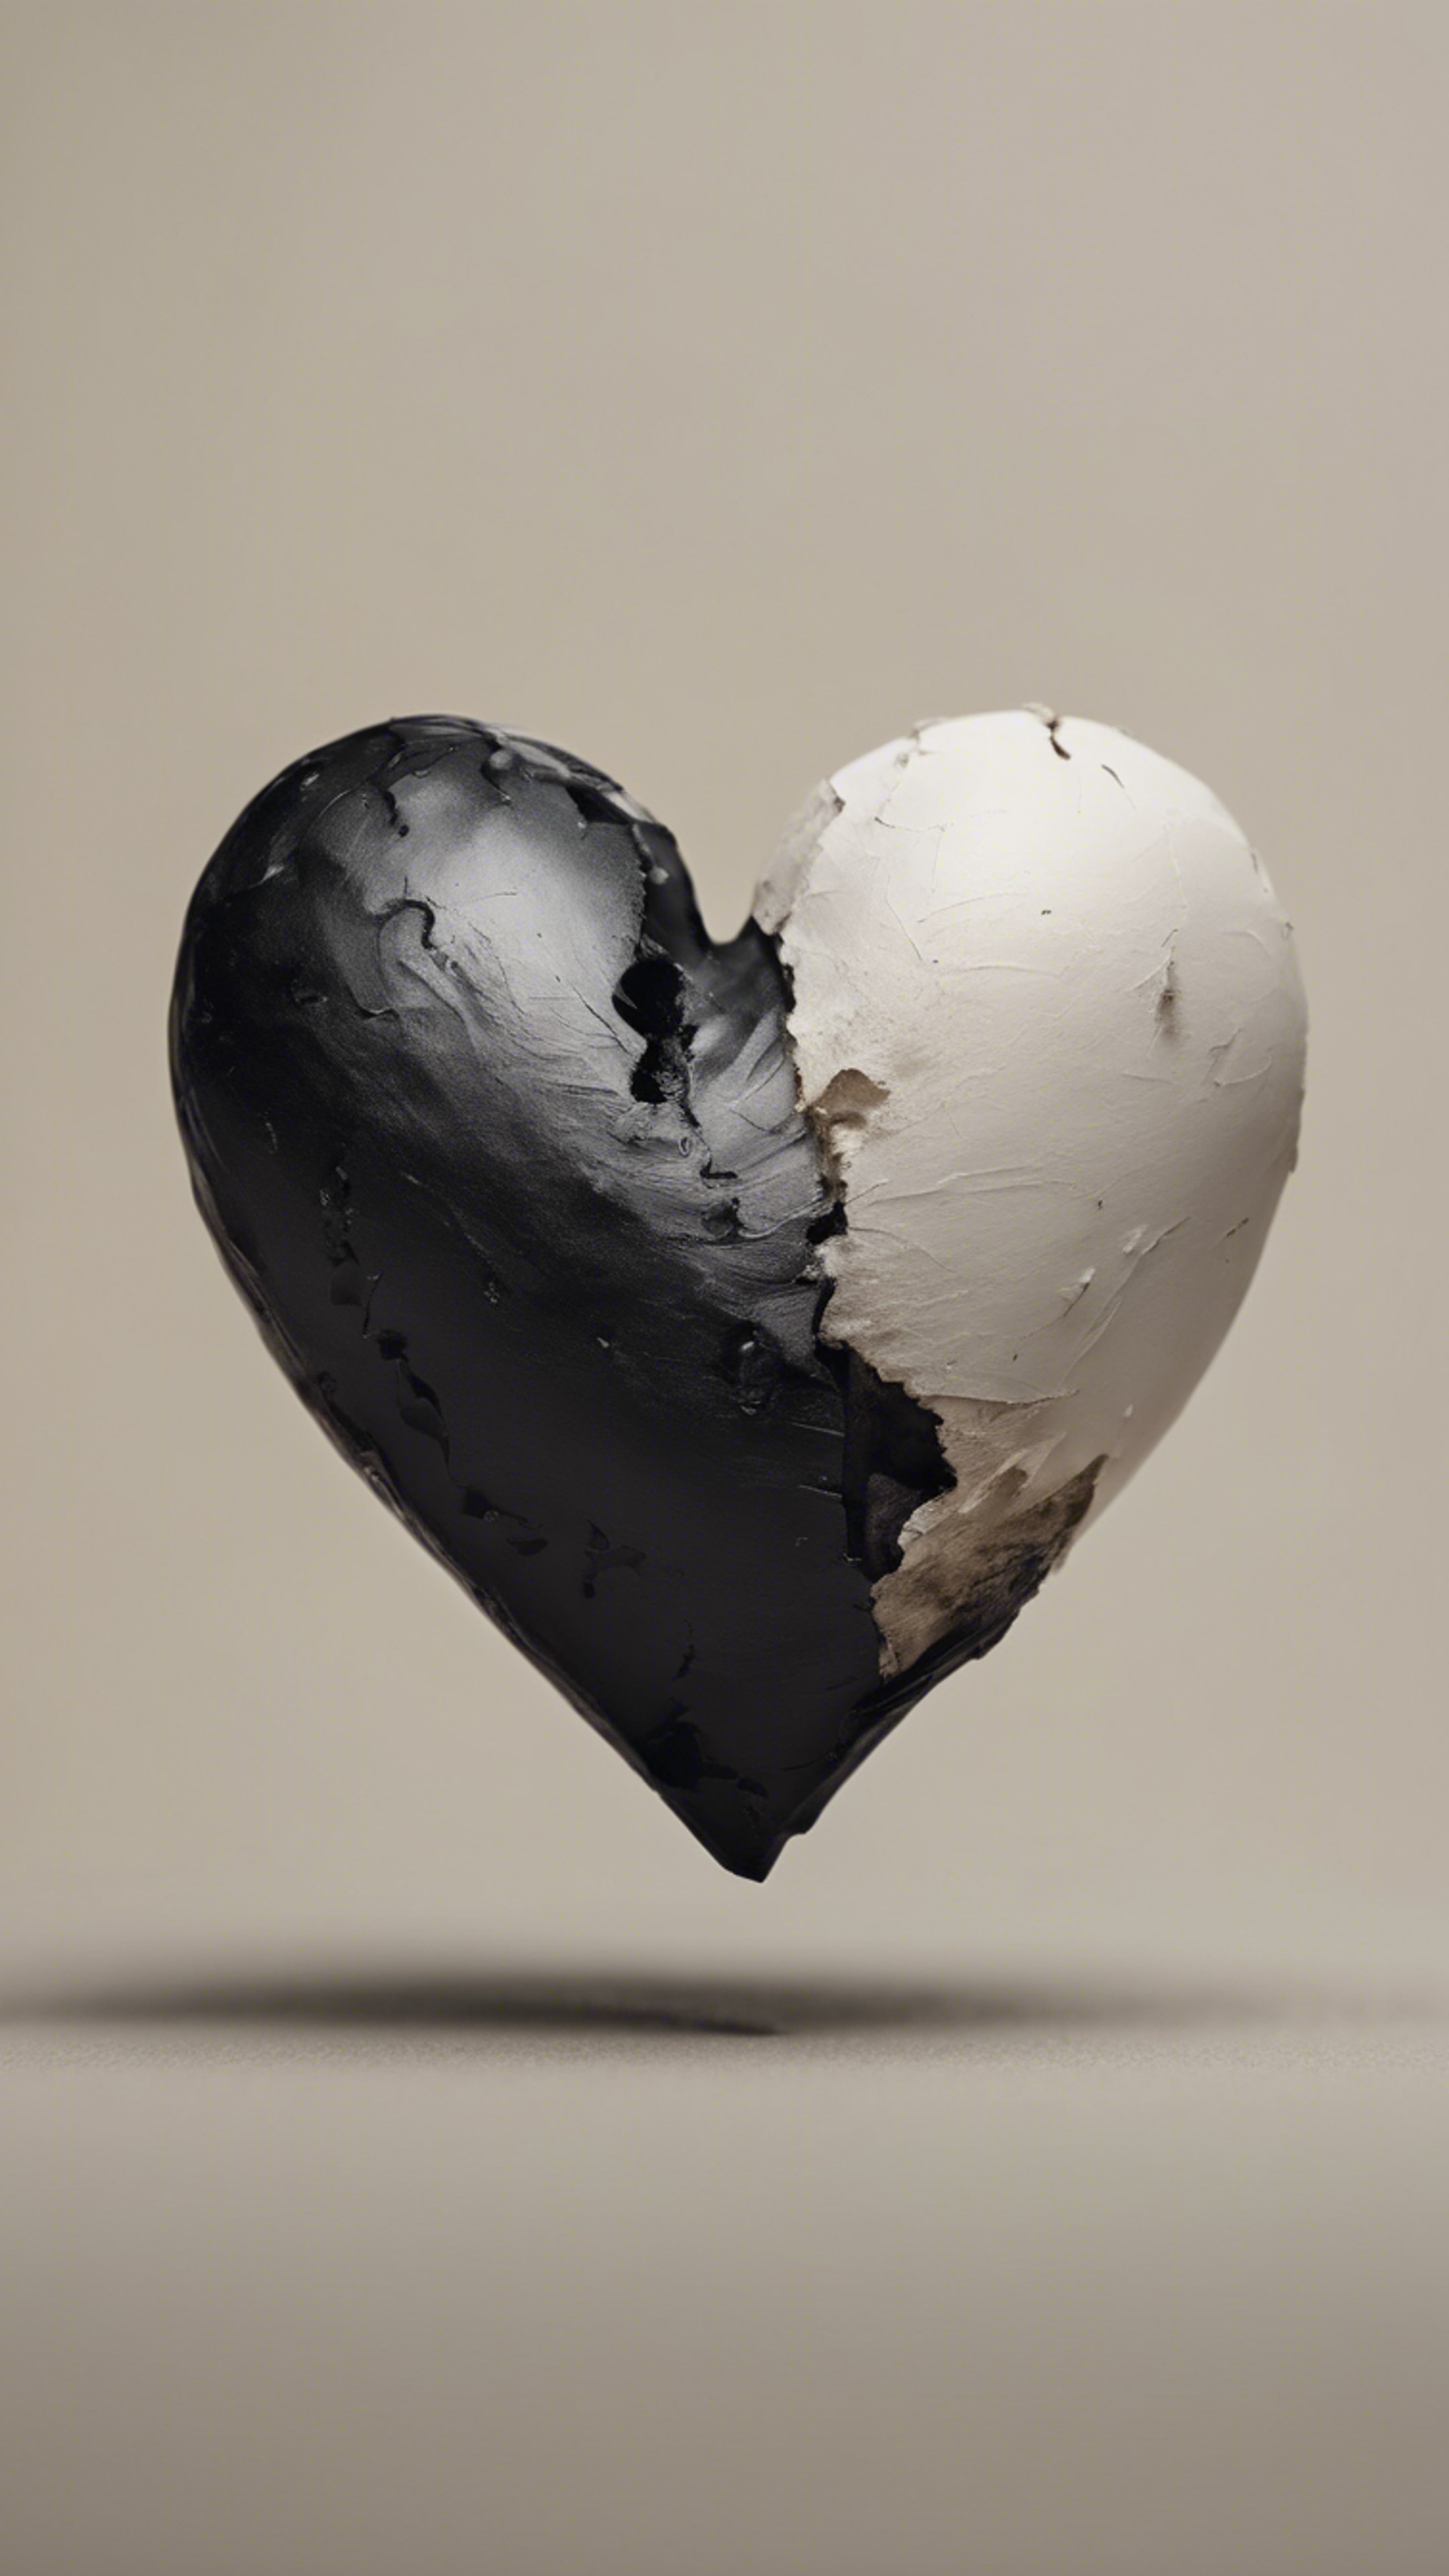 A black heart on one side and a white heart on the other side, against a neutral color background. Wallpaper[e1ad96bec27b409fa1a8]